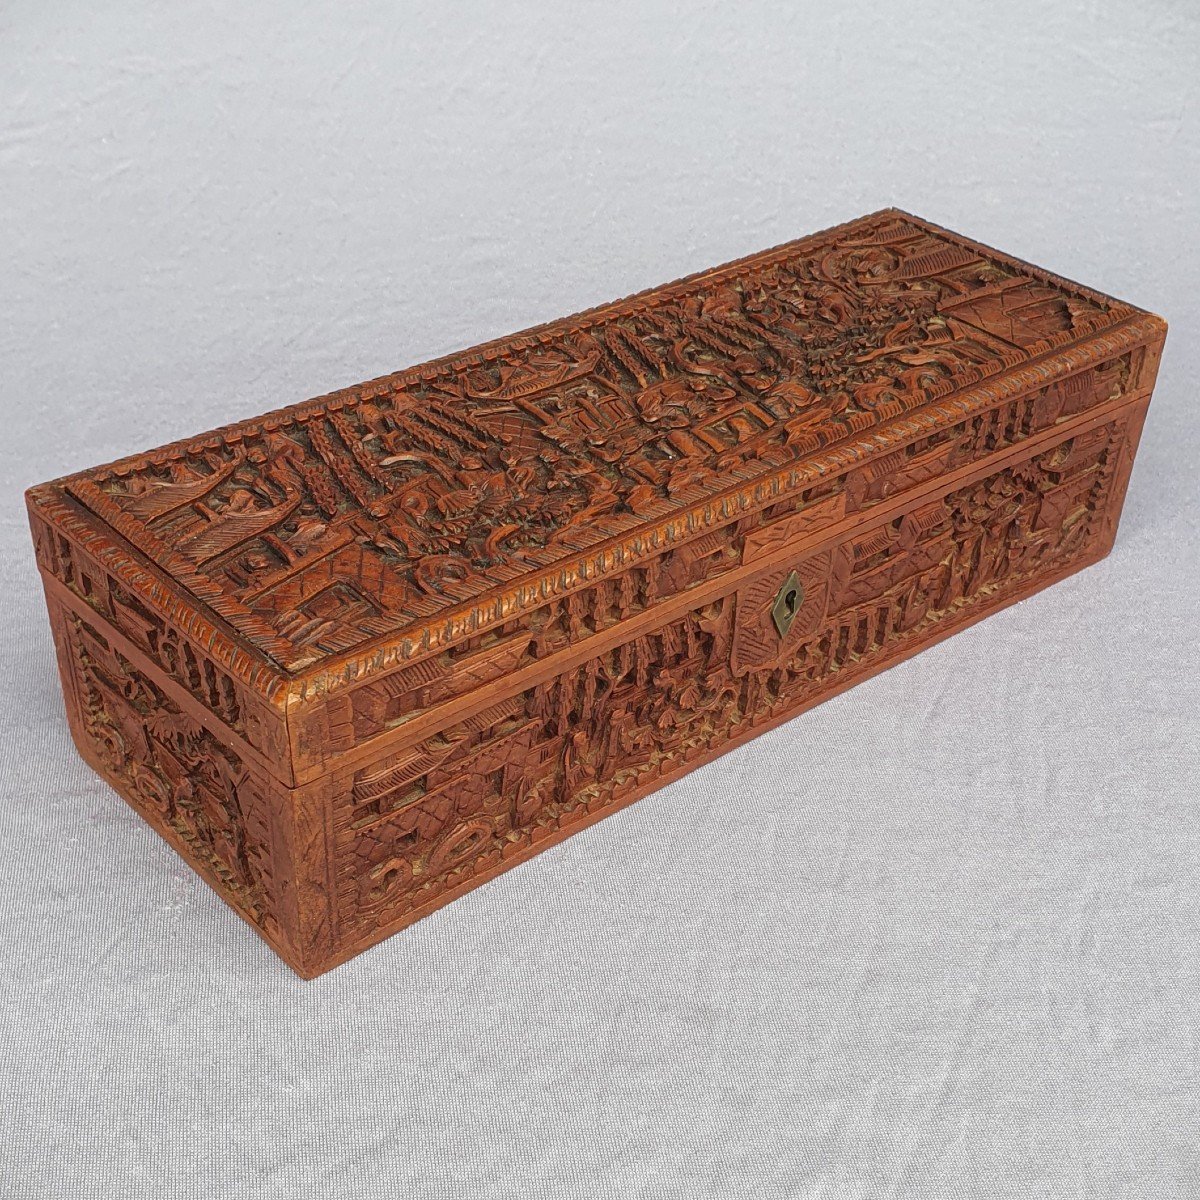 Wooden Box Carved With Pagodas And Characters, China, Canton, 19th Century